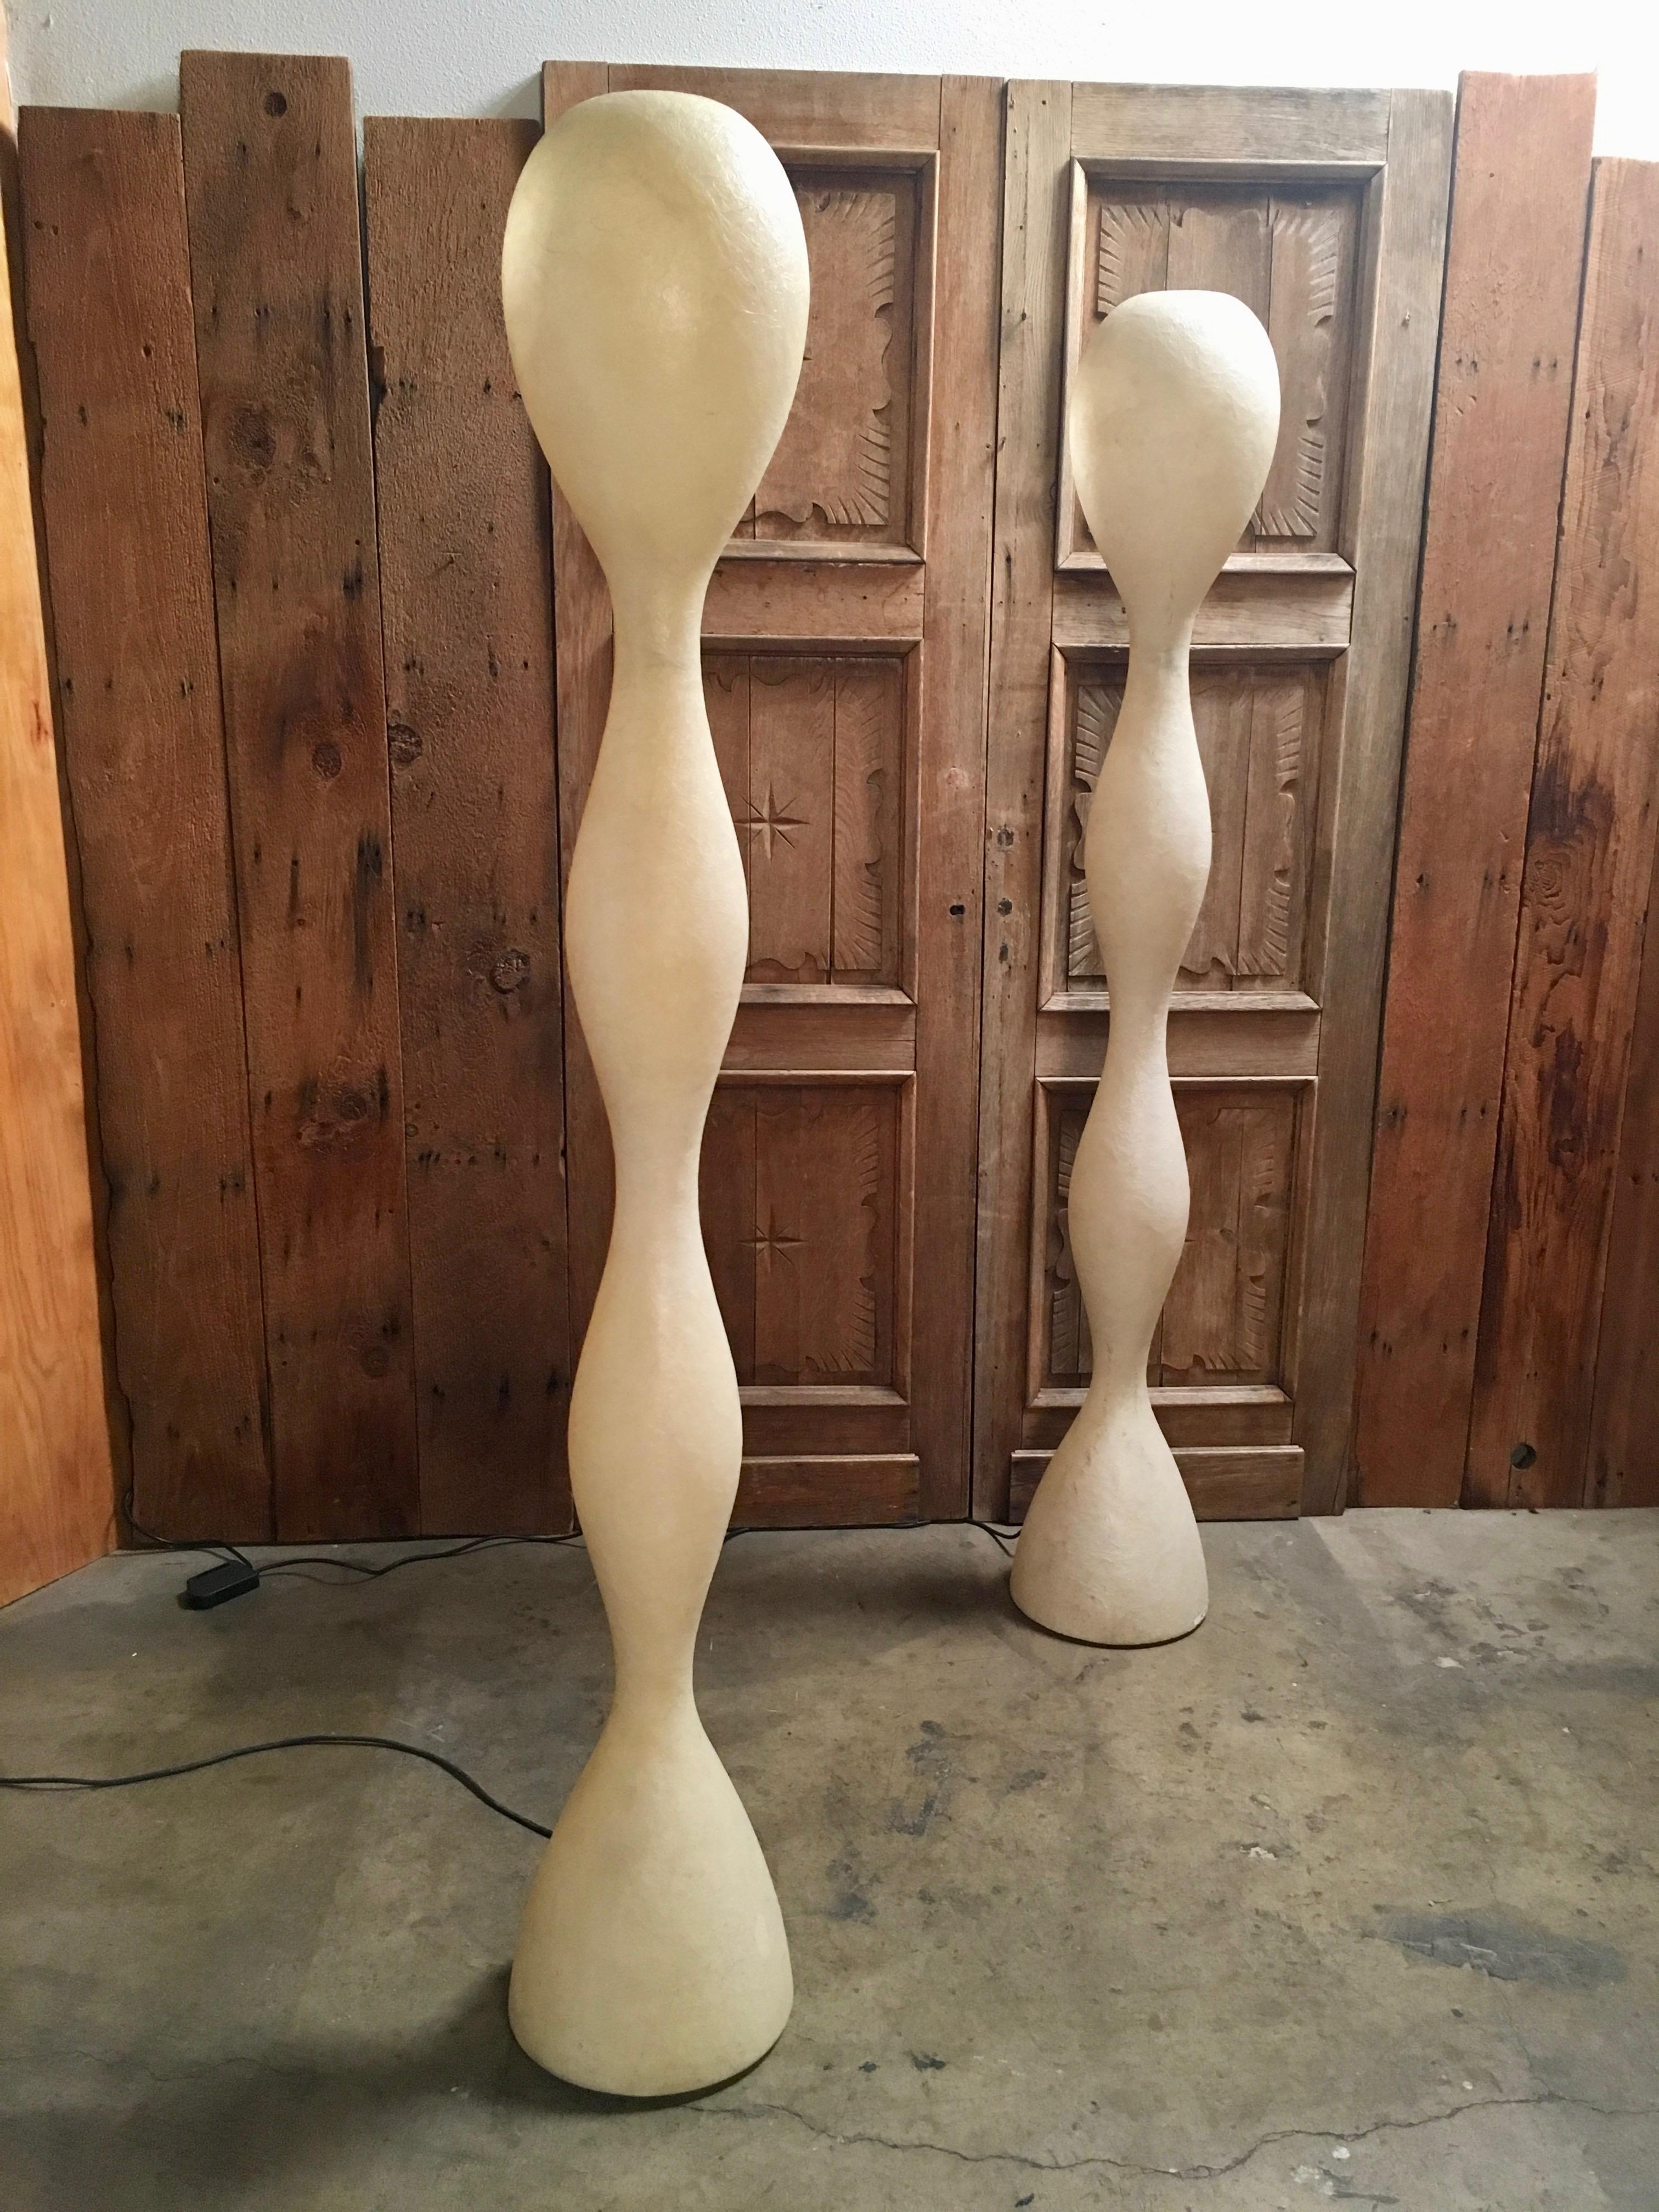 Illuminated off-white sculpted fiberglass floor lamps by Guglielmo Berchicci for Kundalini. With inline dimmer switch.